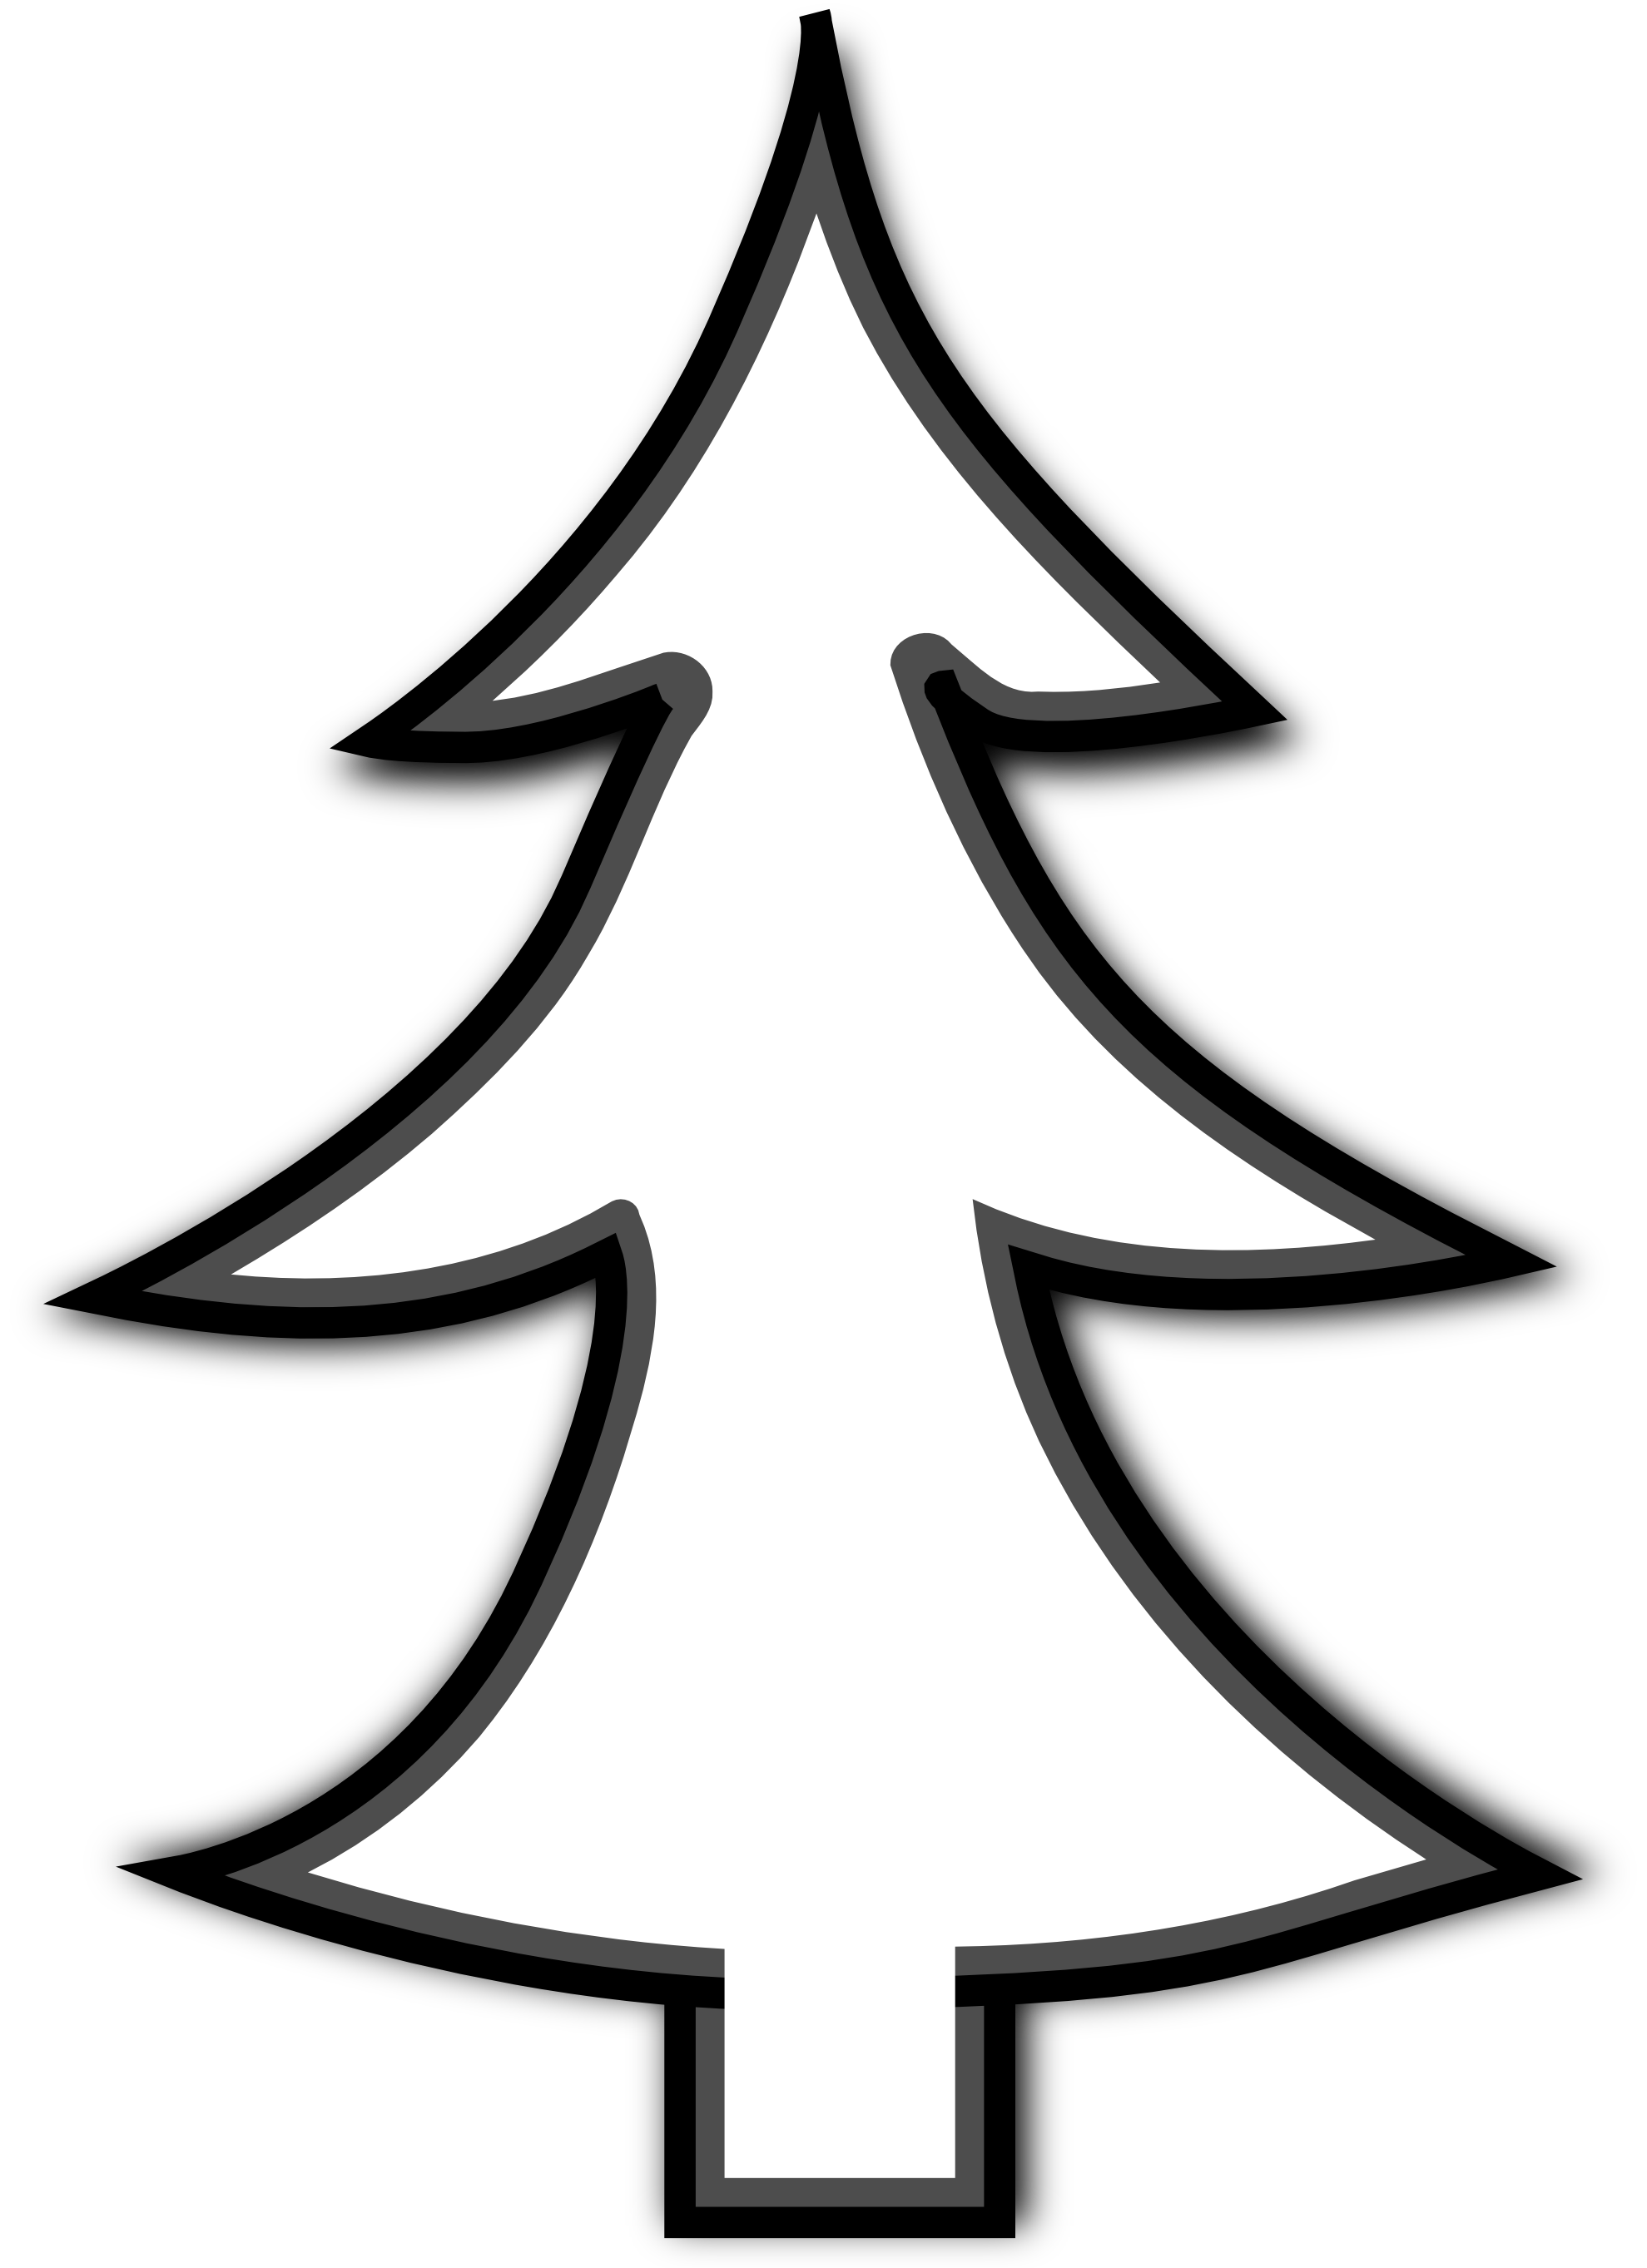 Christmas Tree Black And White | Clipart Panda - Free Clipart Images